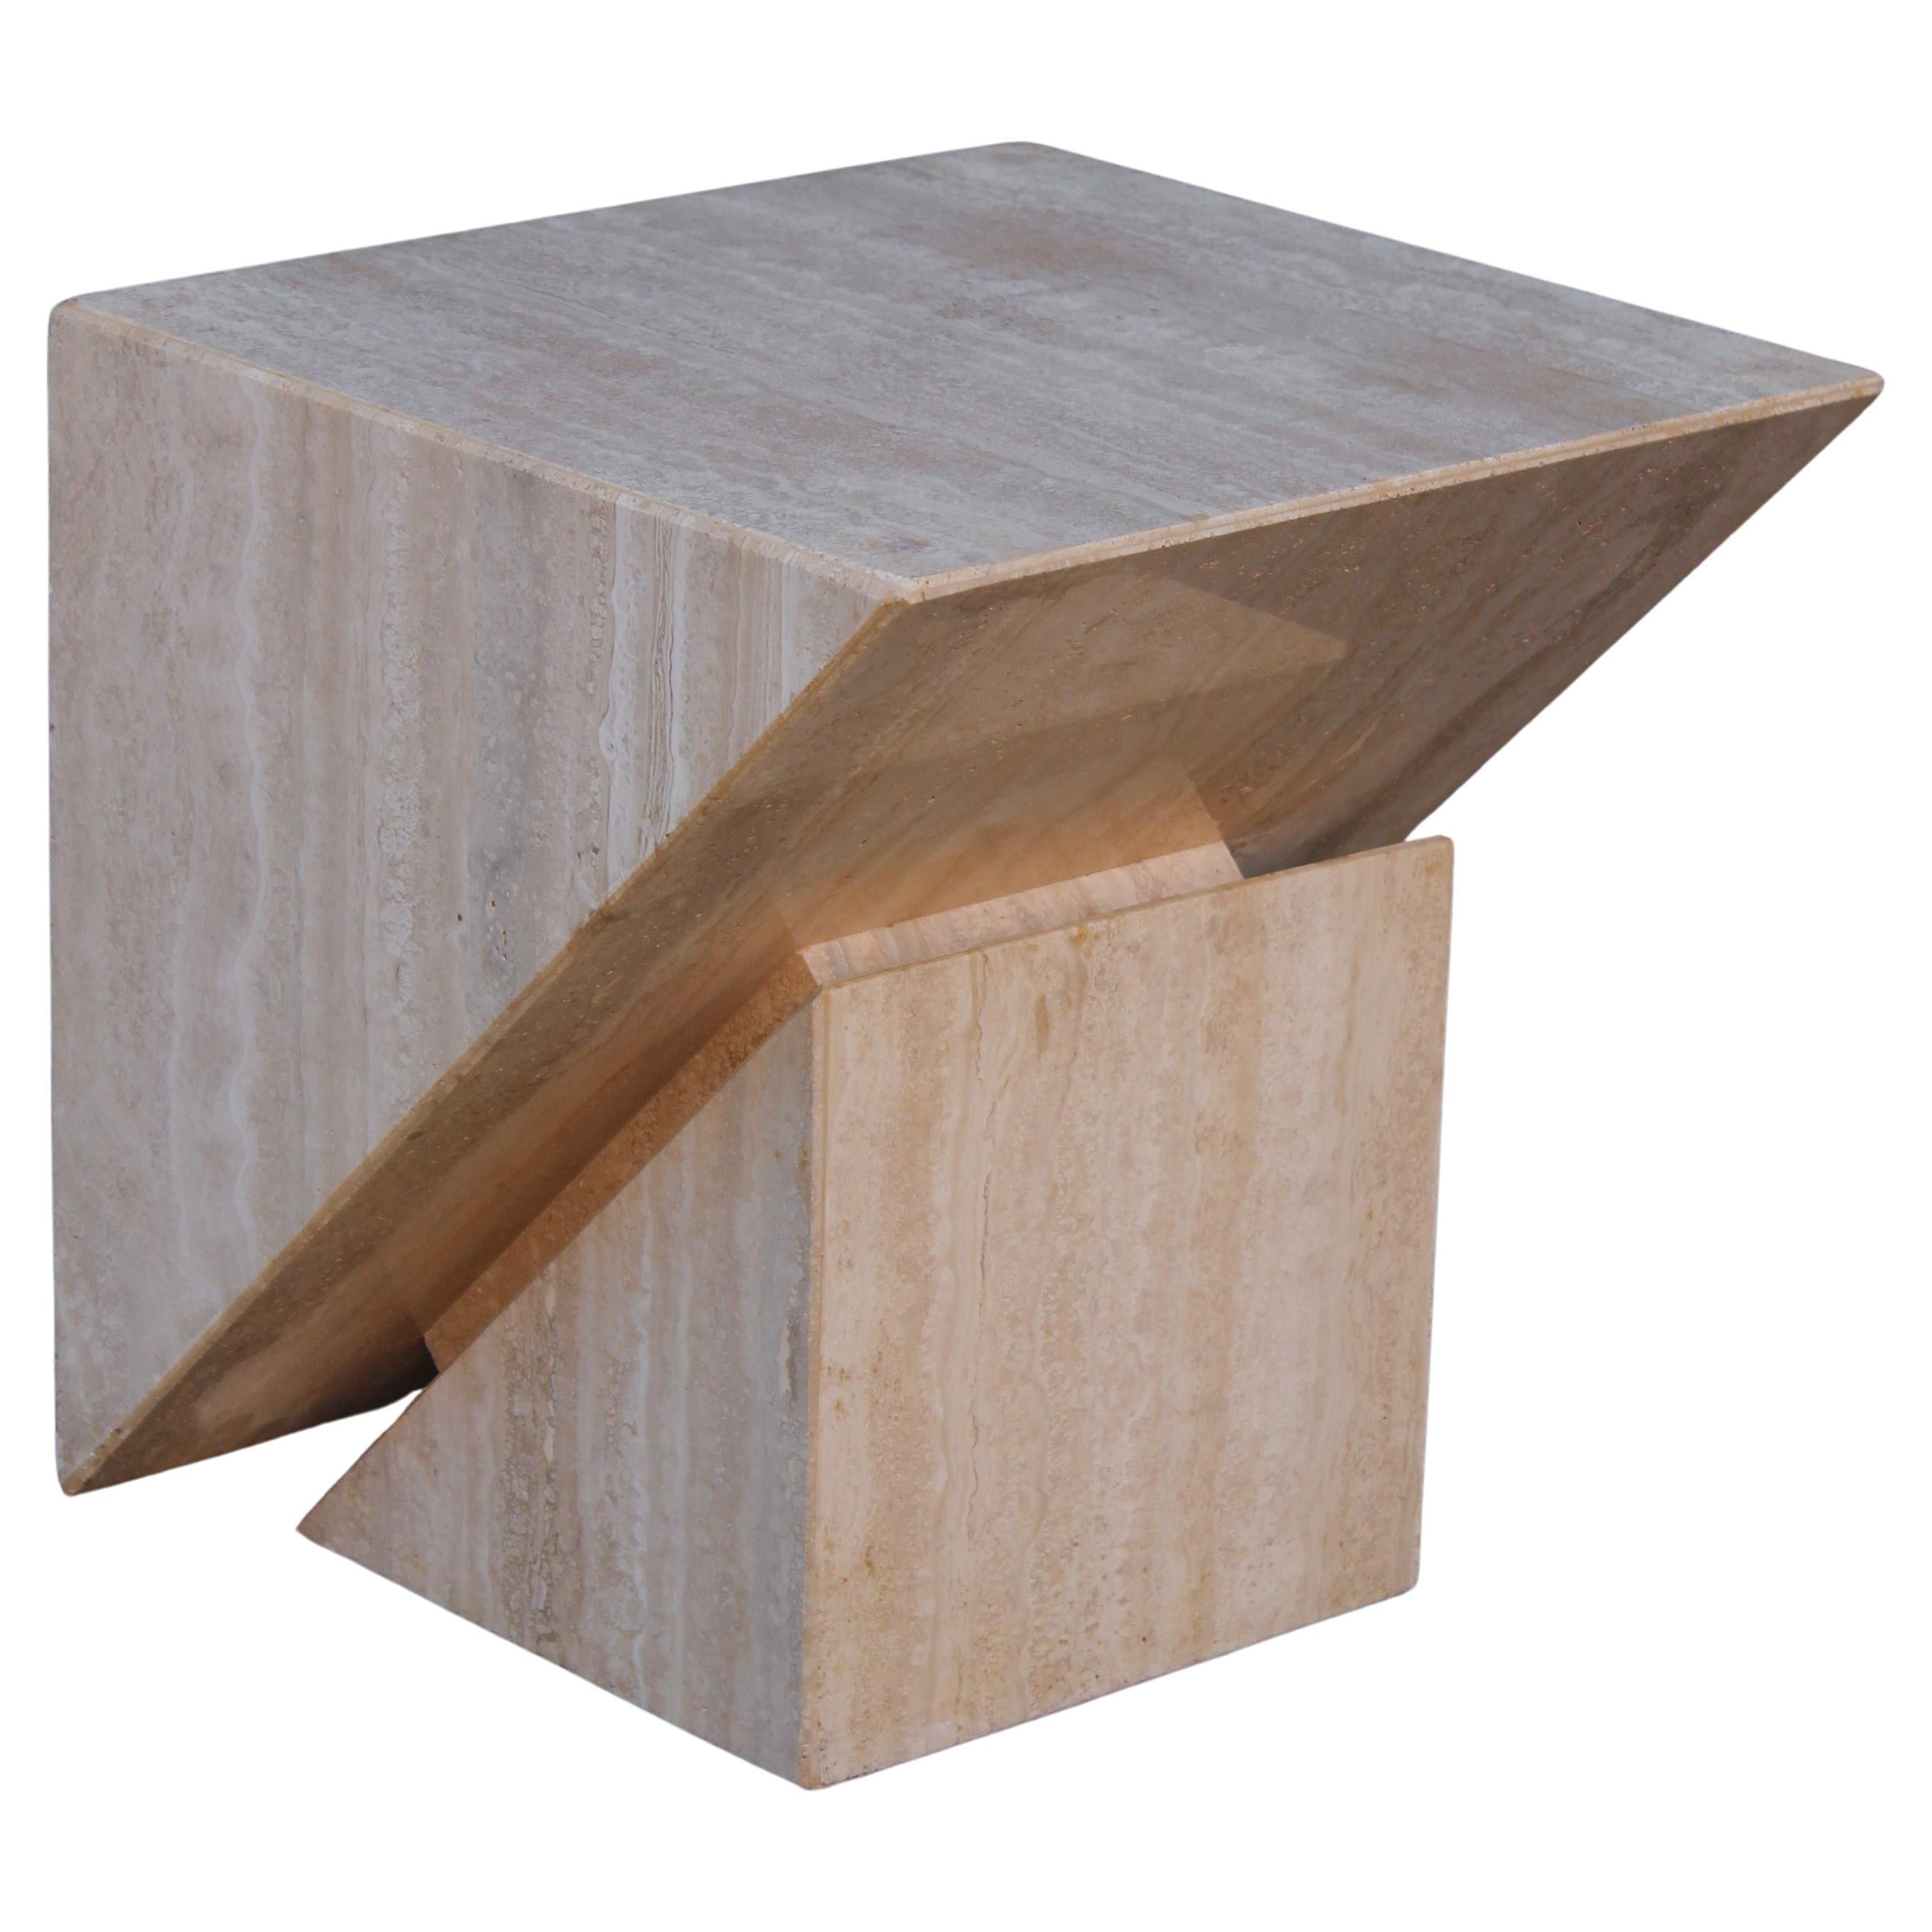 Midcentury Italian Post Modern Travertine Marble Cube Side Table or End Table For Sale